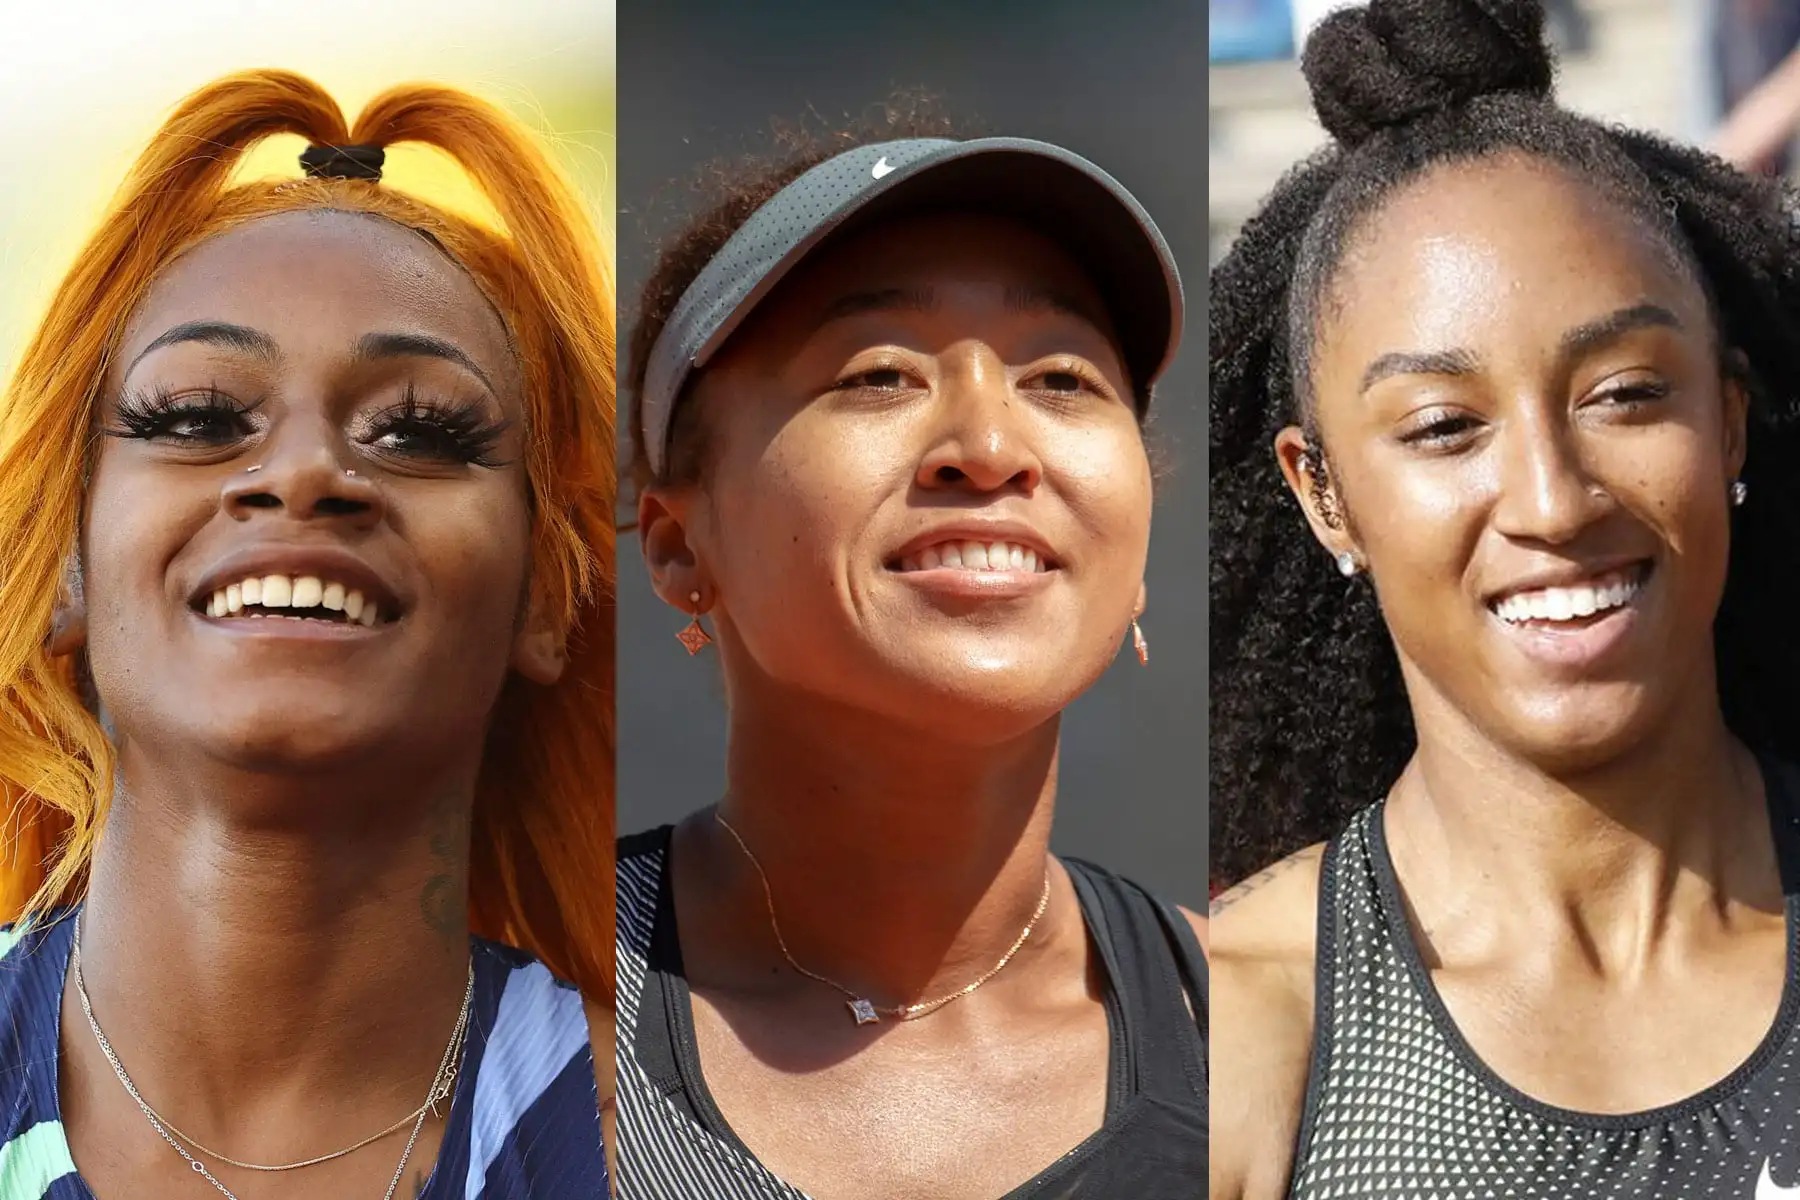 How the sports world failed when 3 Black women needed help photo